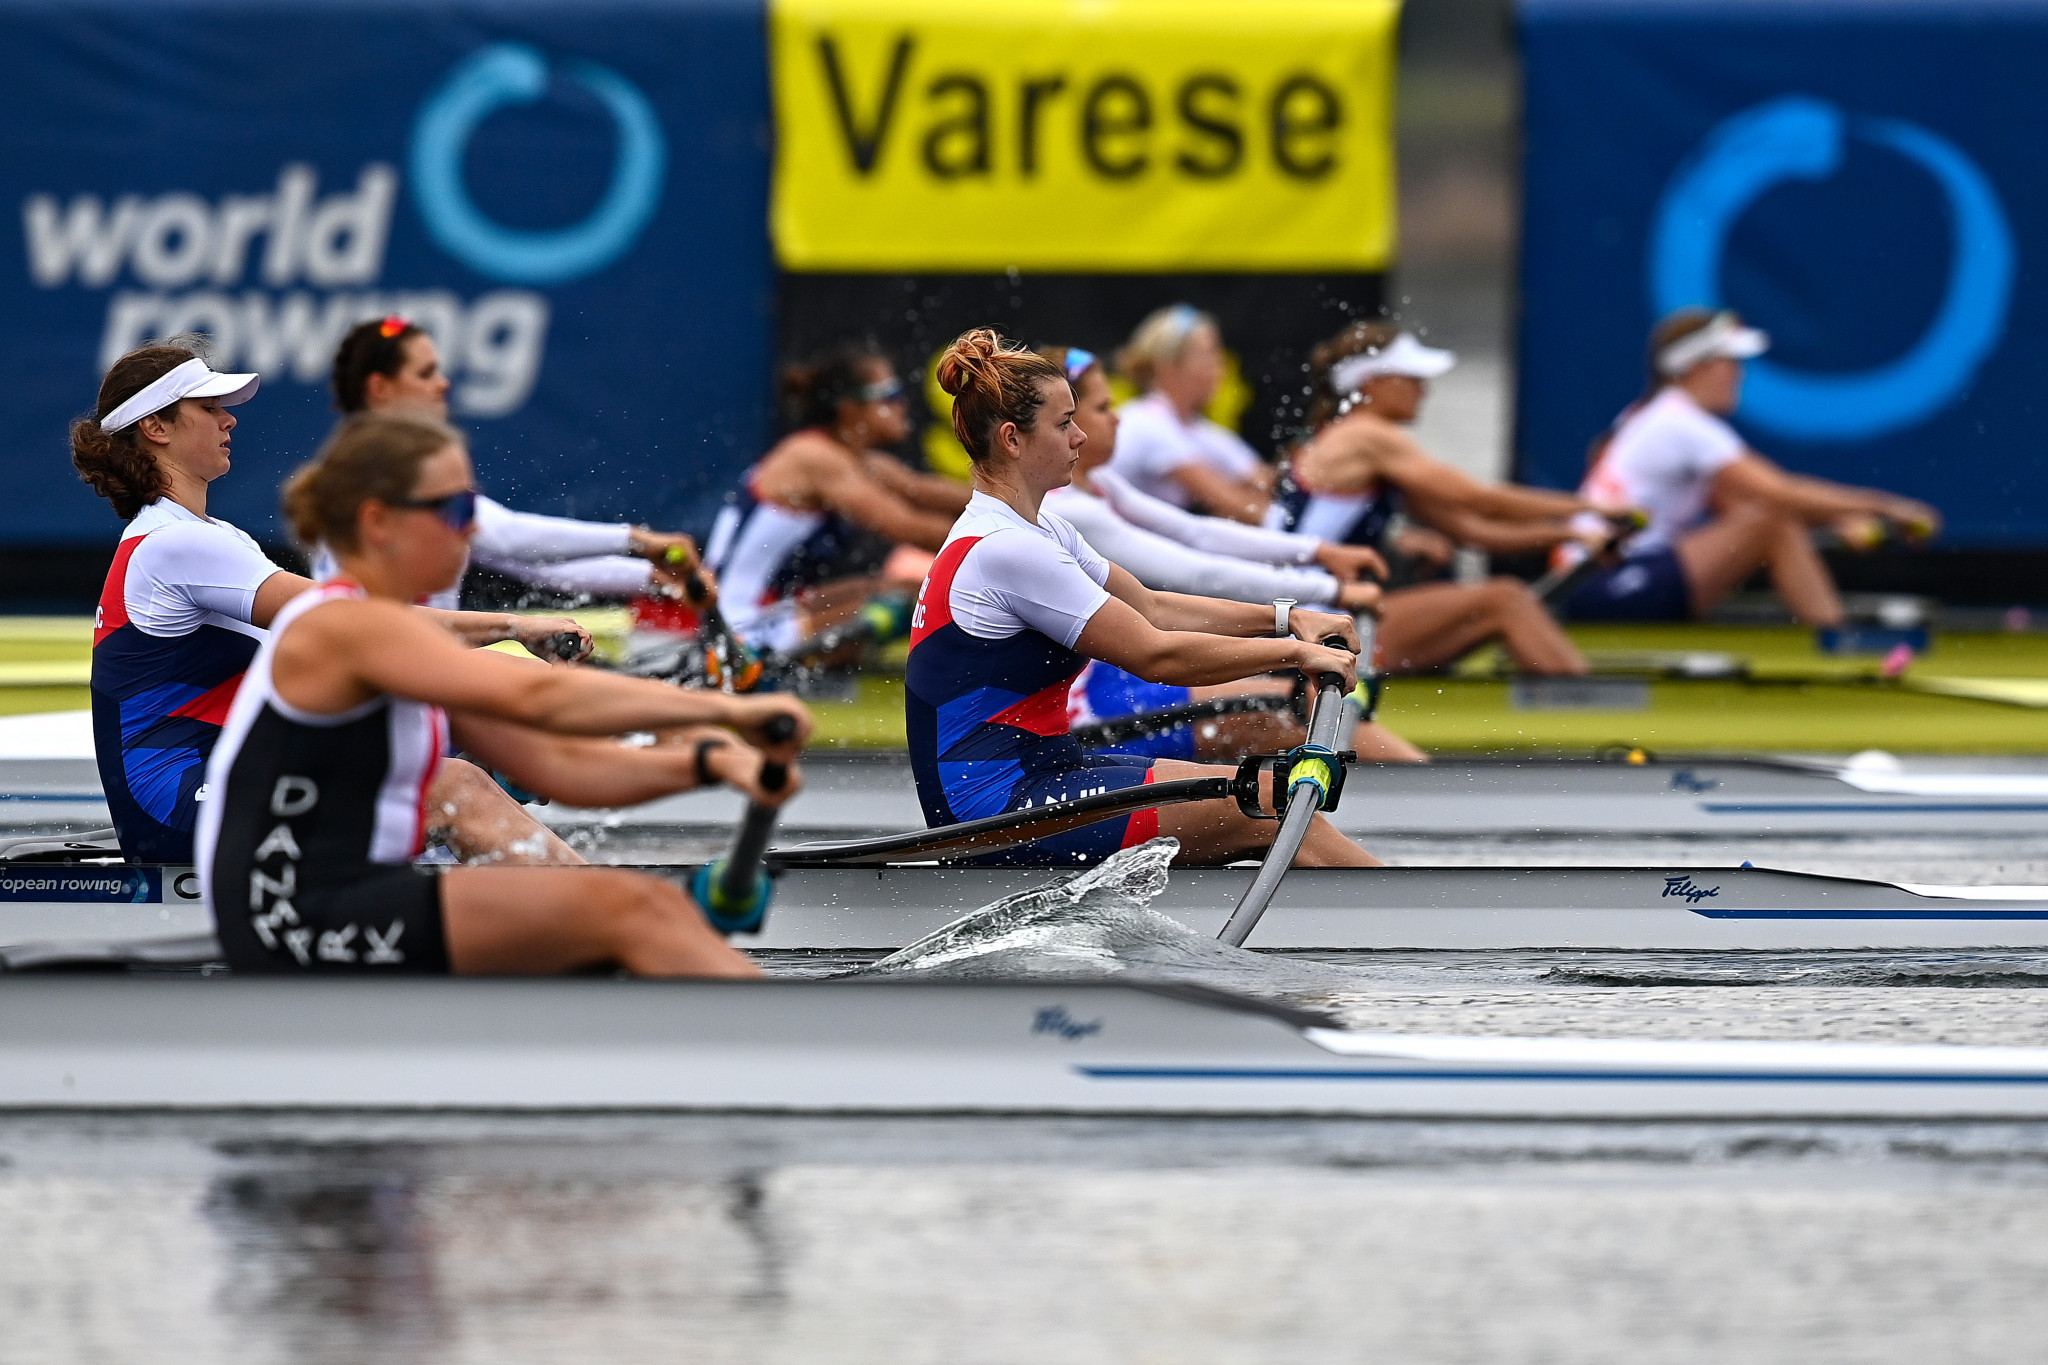 Turkish team removed from European Rowing Championships after three COVID-19 positives